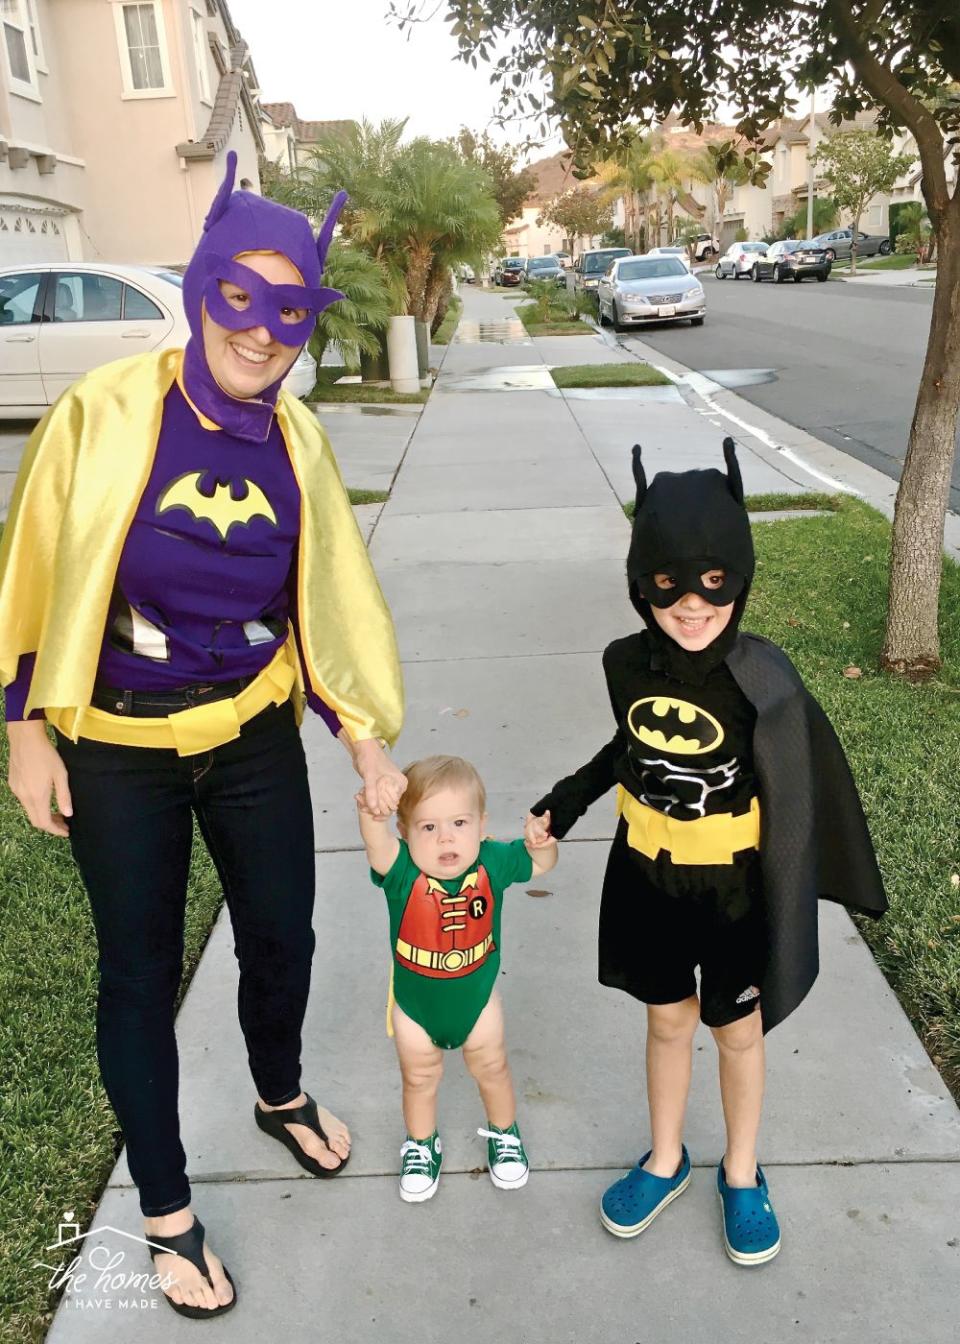 35 Best Family Halloween Costumes That Will Be a Hit With Your Whole Crew